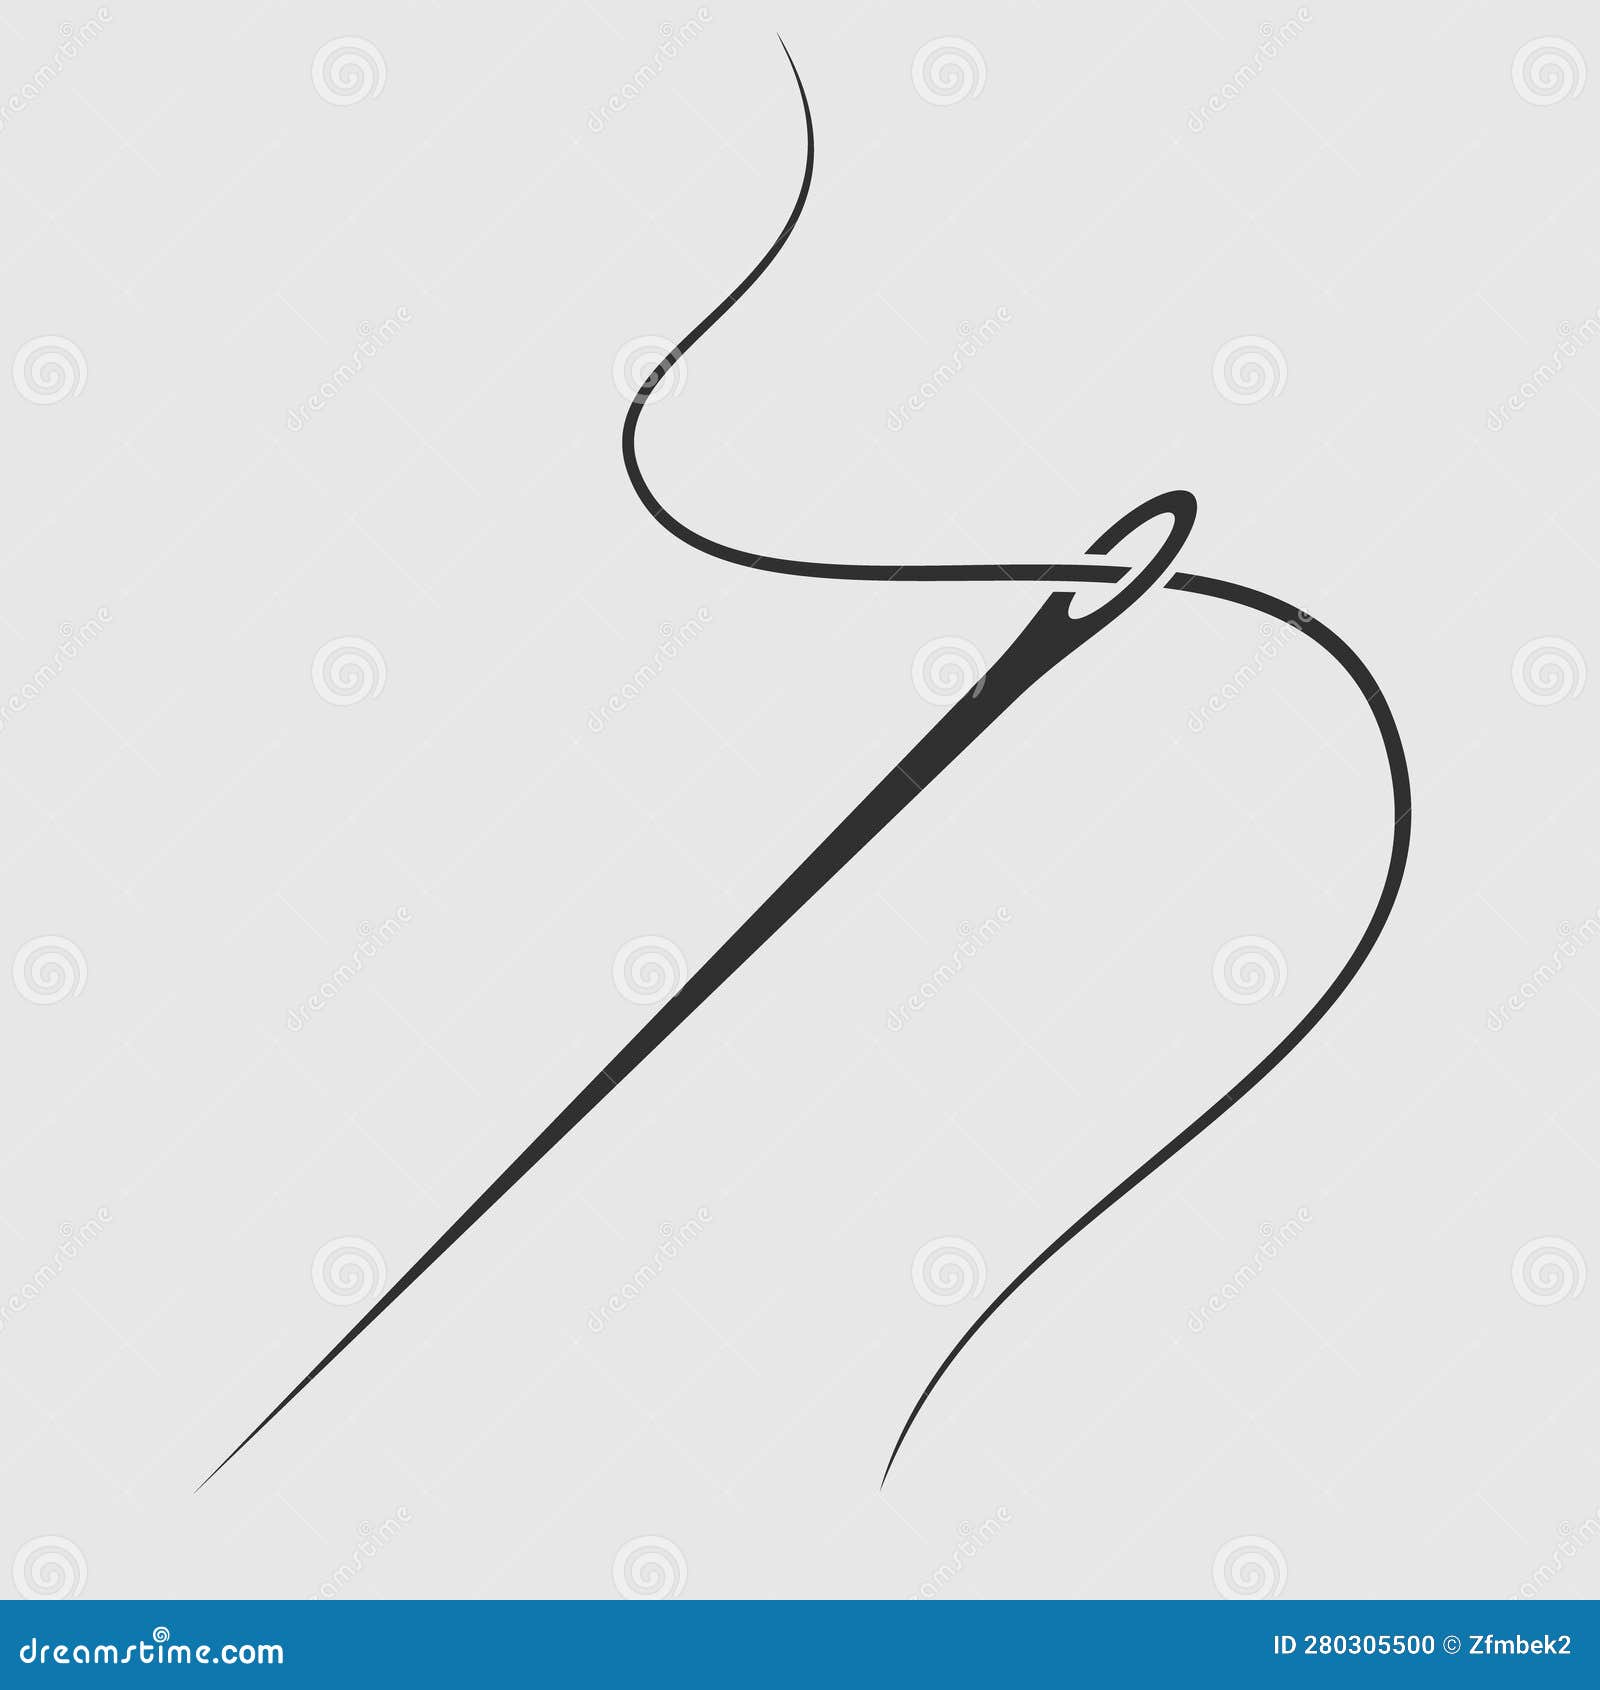 Needle and Thread Silhouette Isolated on White Stock Vector ...